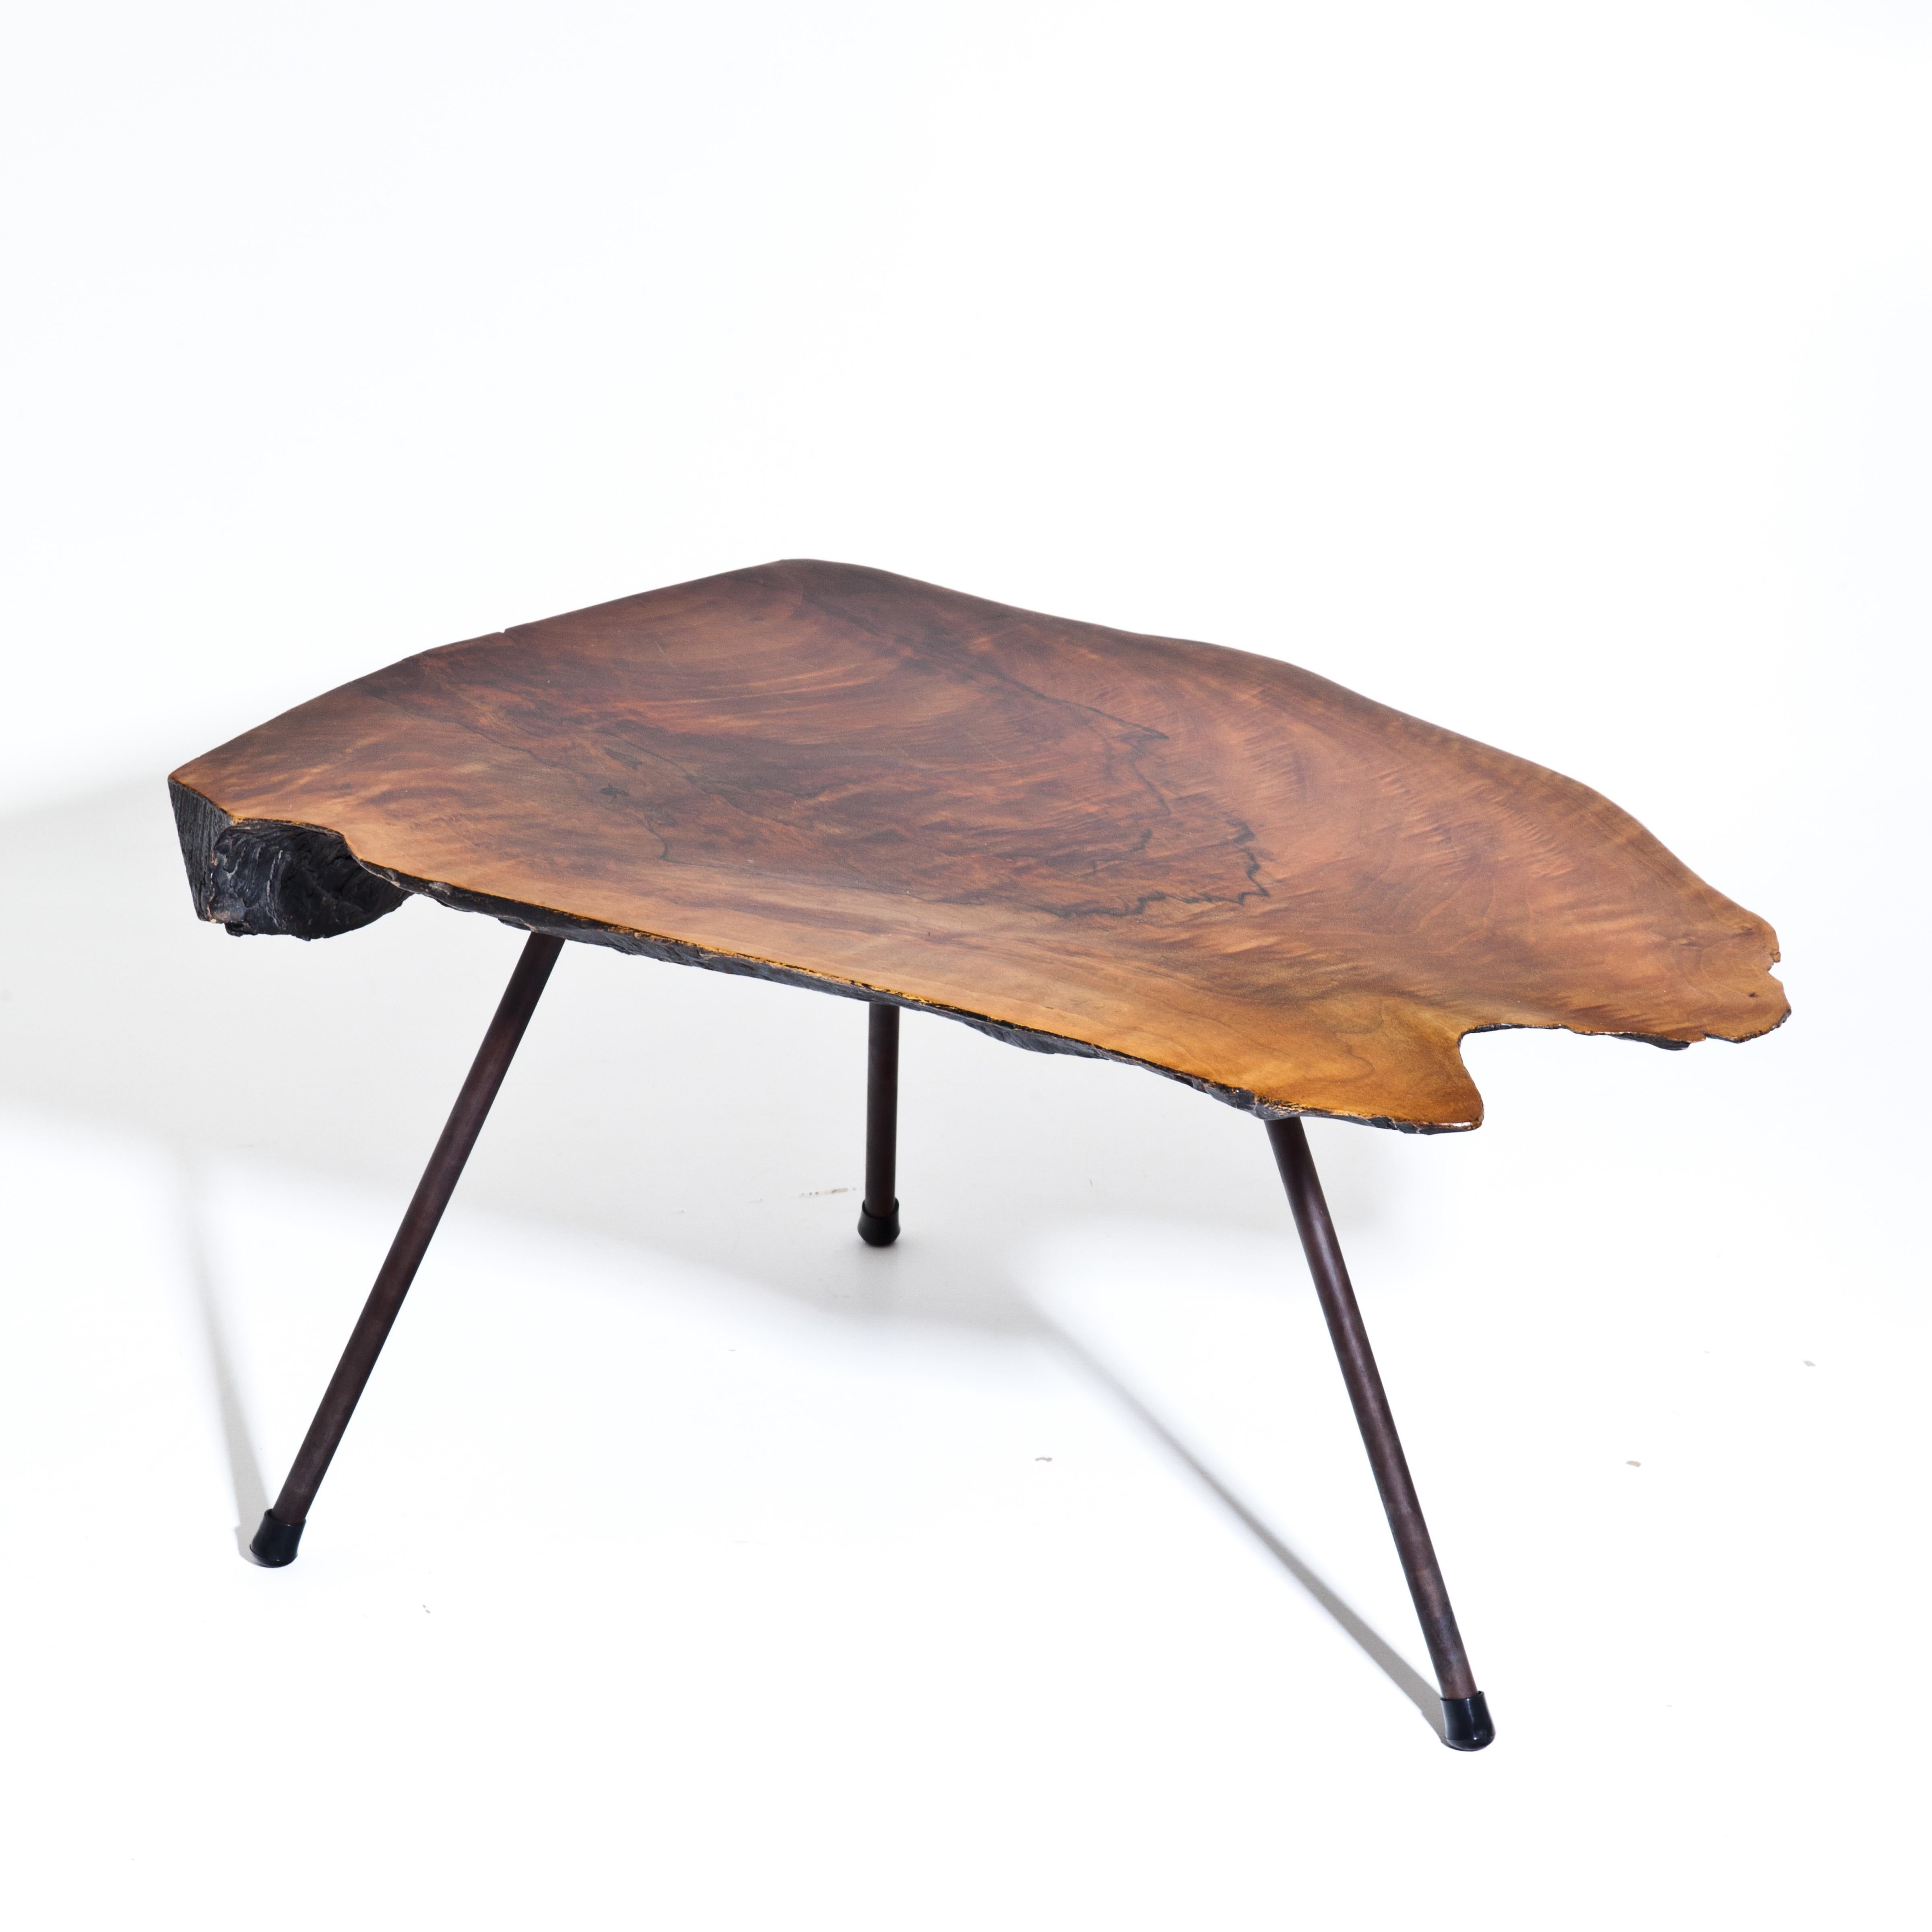 Walnut coffee table by Carl Auböck with three iron feet and blackened underside. Numbered 